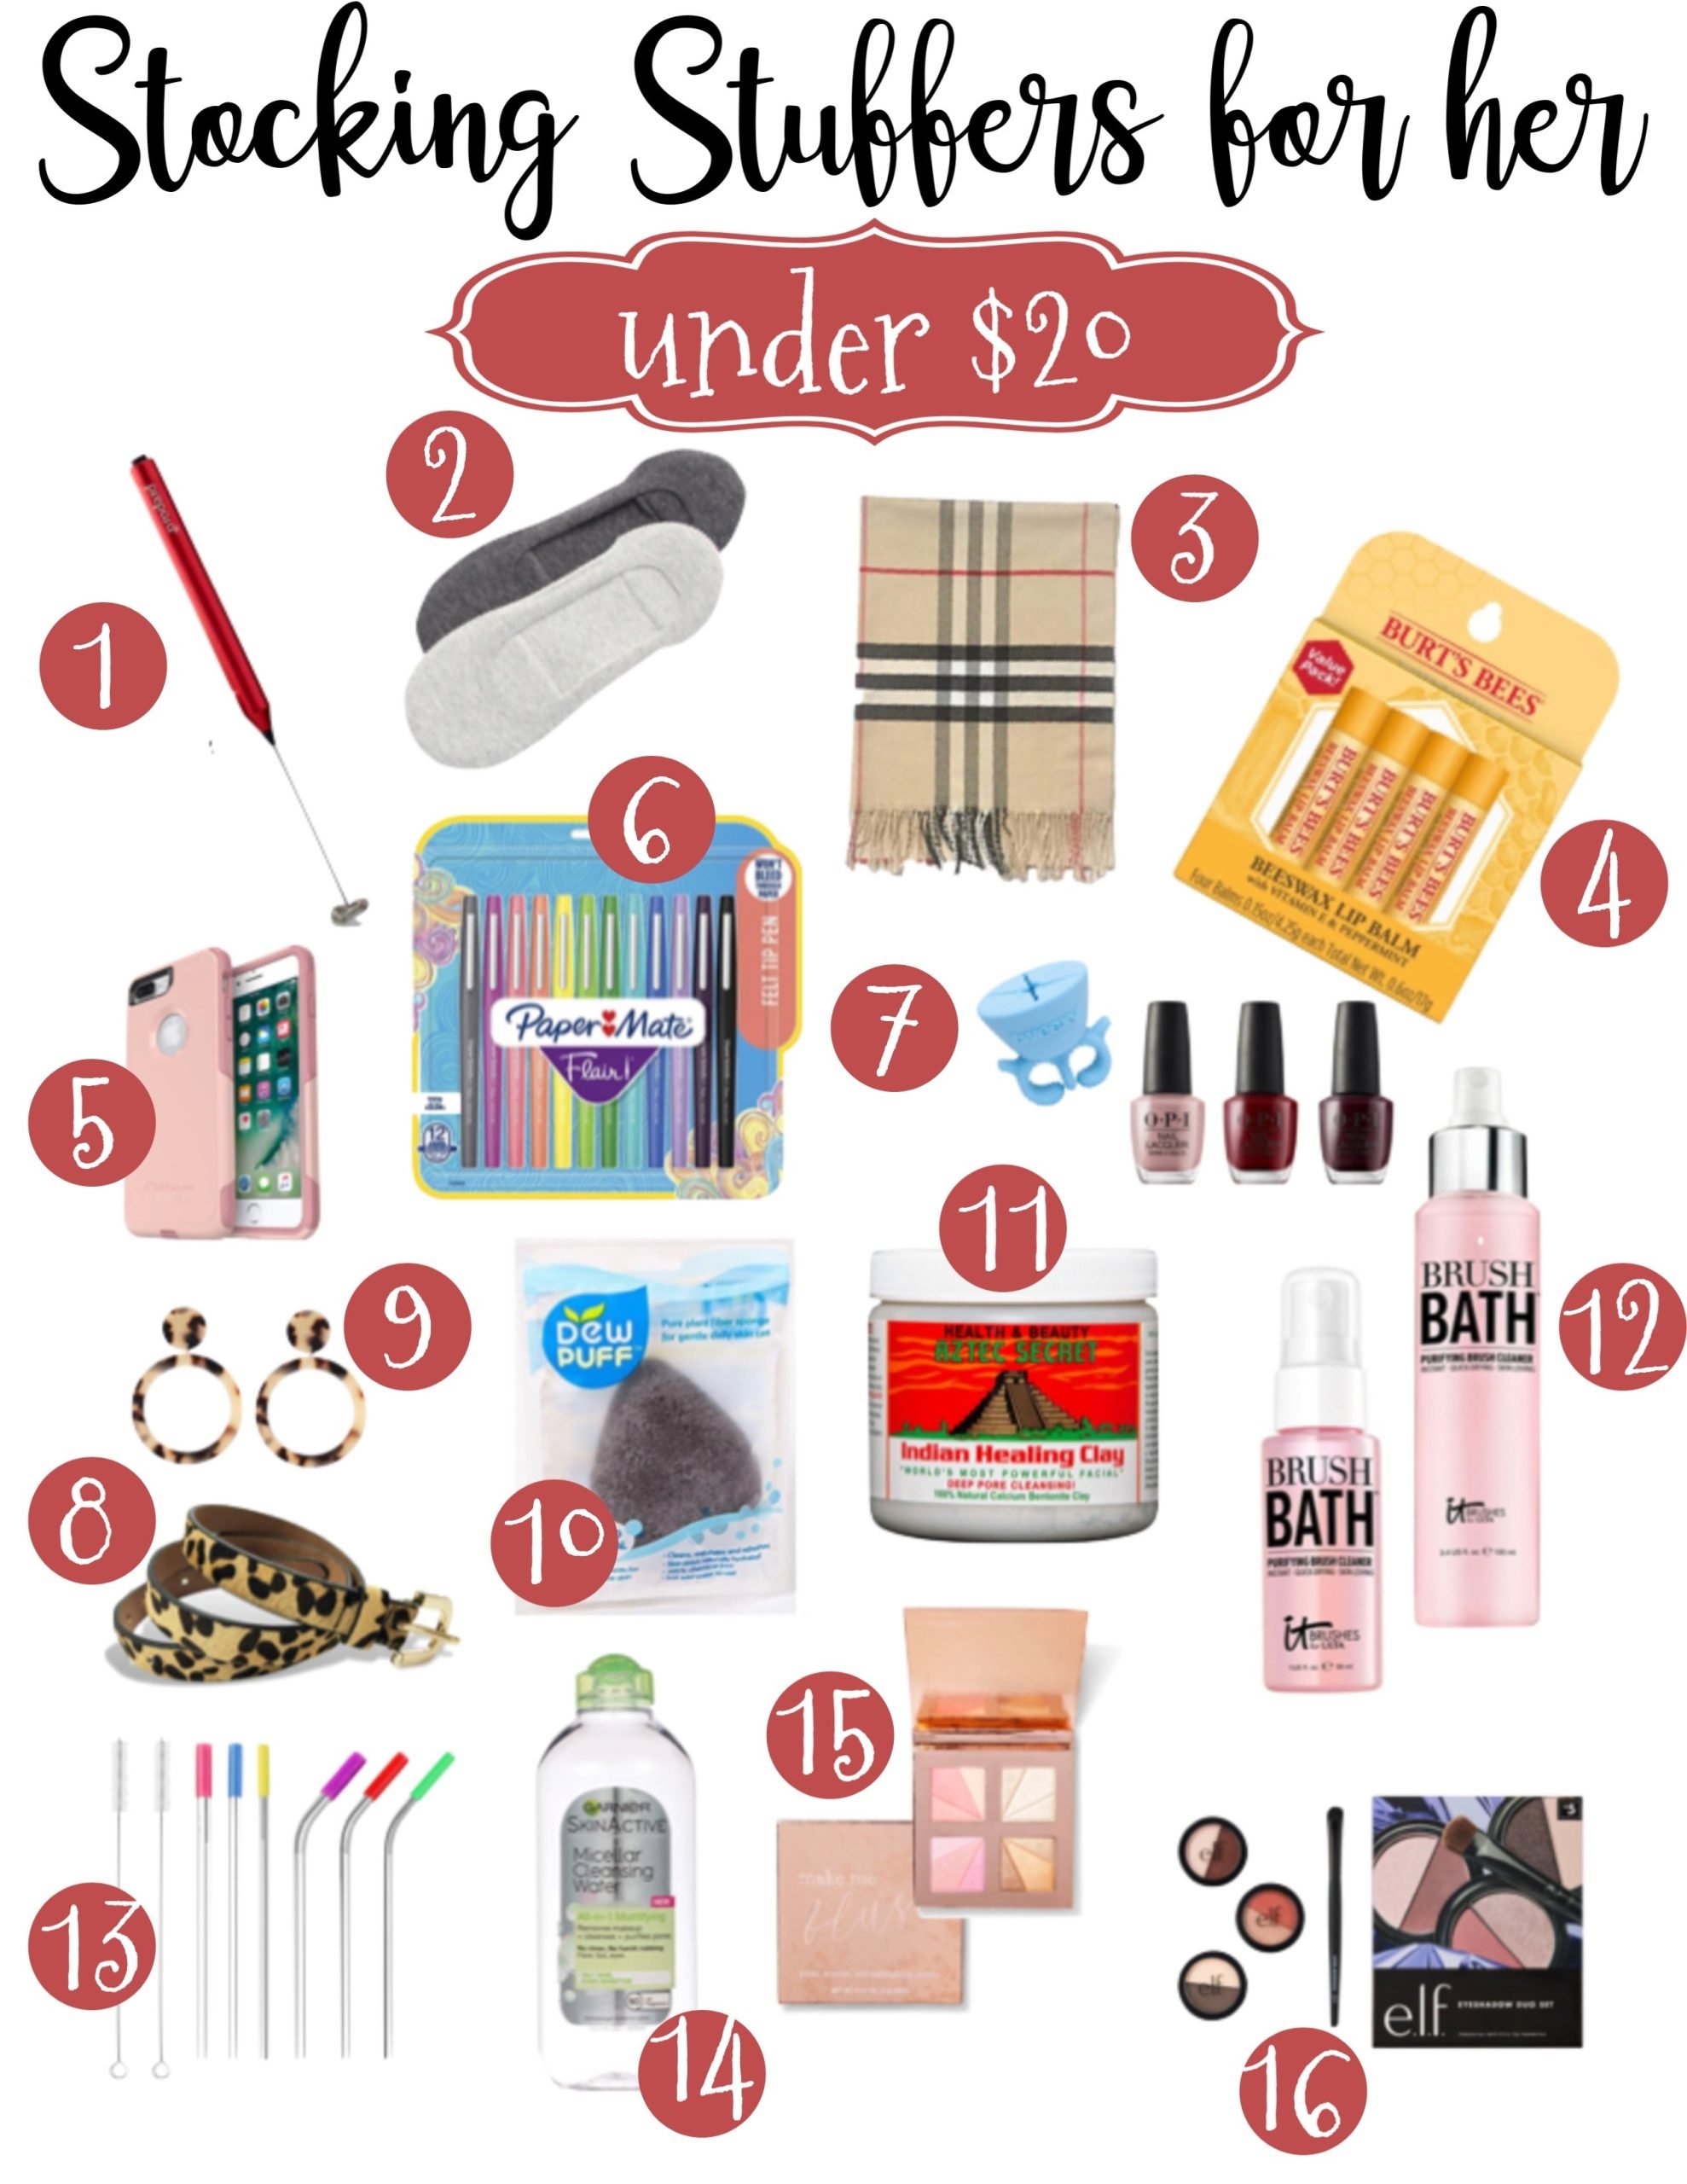 Gifts Under $20 for the Stockings - Wishes & Reality